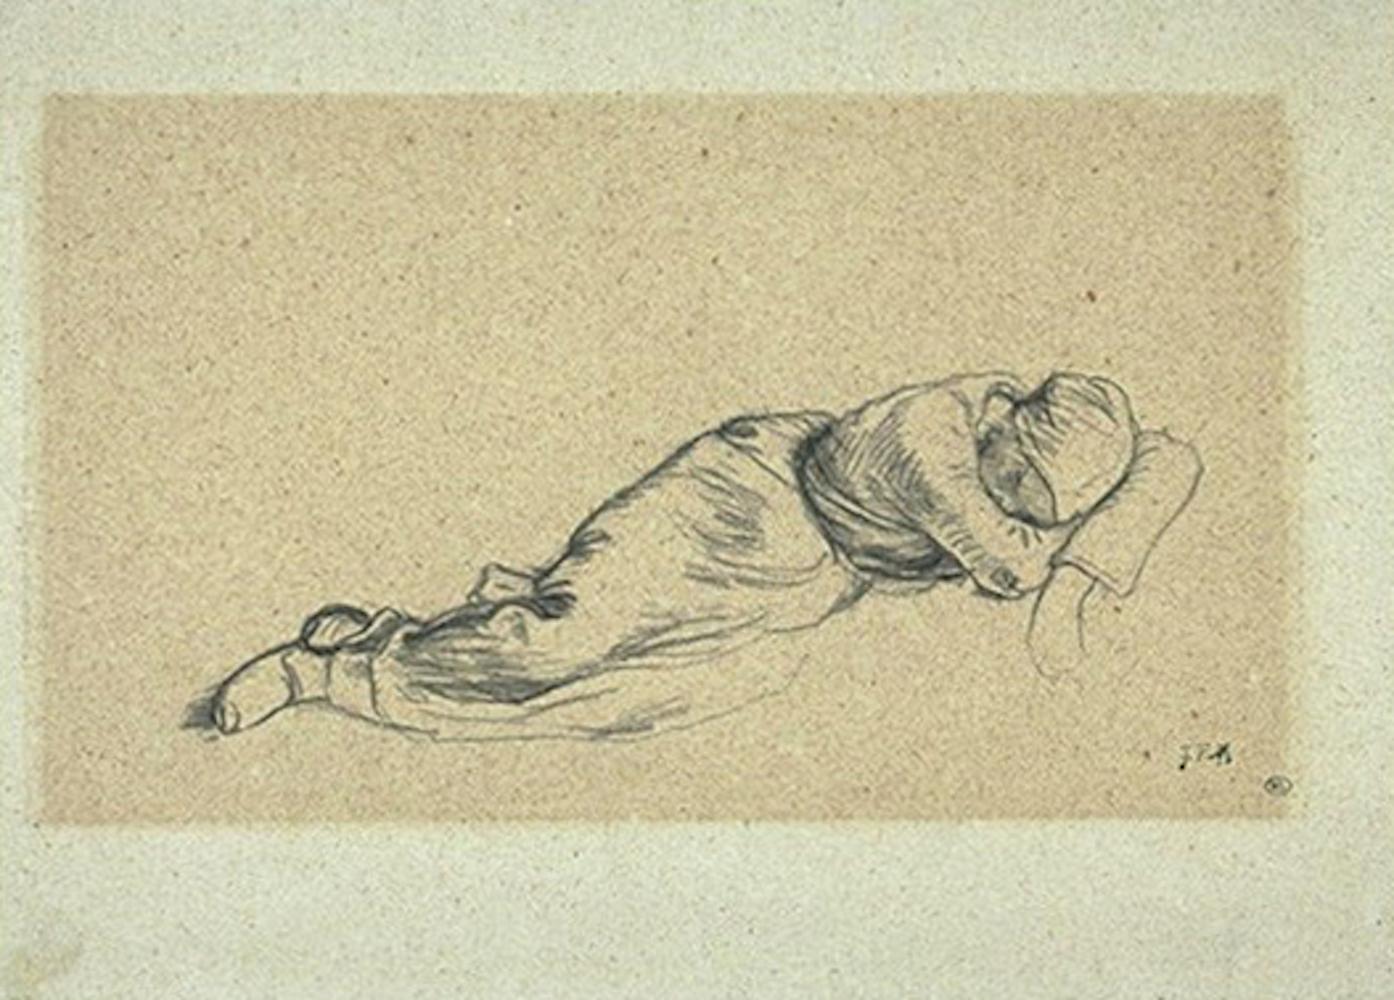 Study of the sleeping woman from “La meridienne”,
Black pencil drawing on paper (sketchbook), stamped from the widow's sale in 1894 (Lugt L.3728) lower left, Paper 9.2x13.2 cm, drawing 5.5x11 cm. Circa 1858.
The pictures include works related to the